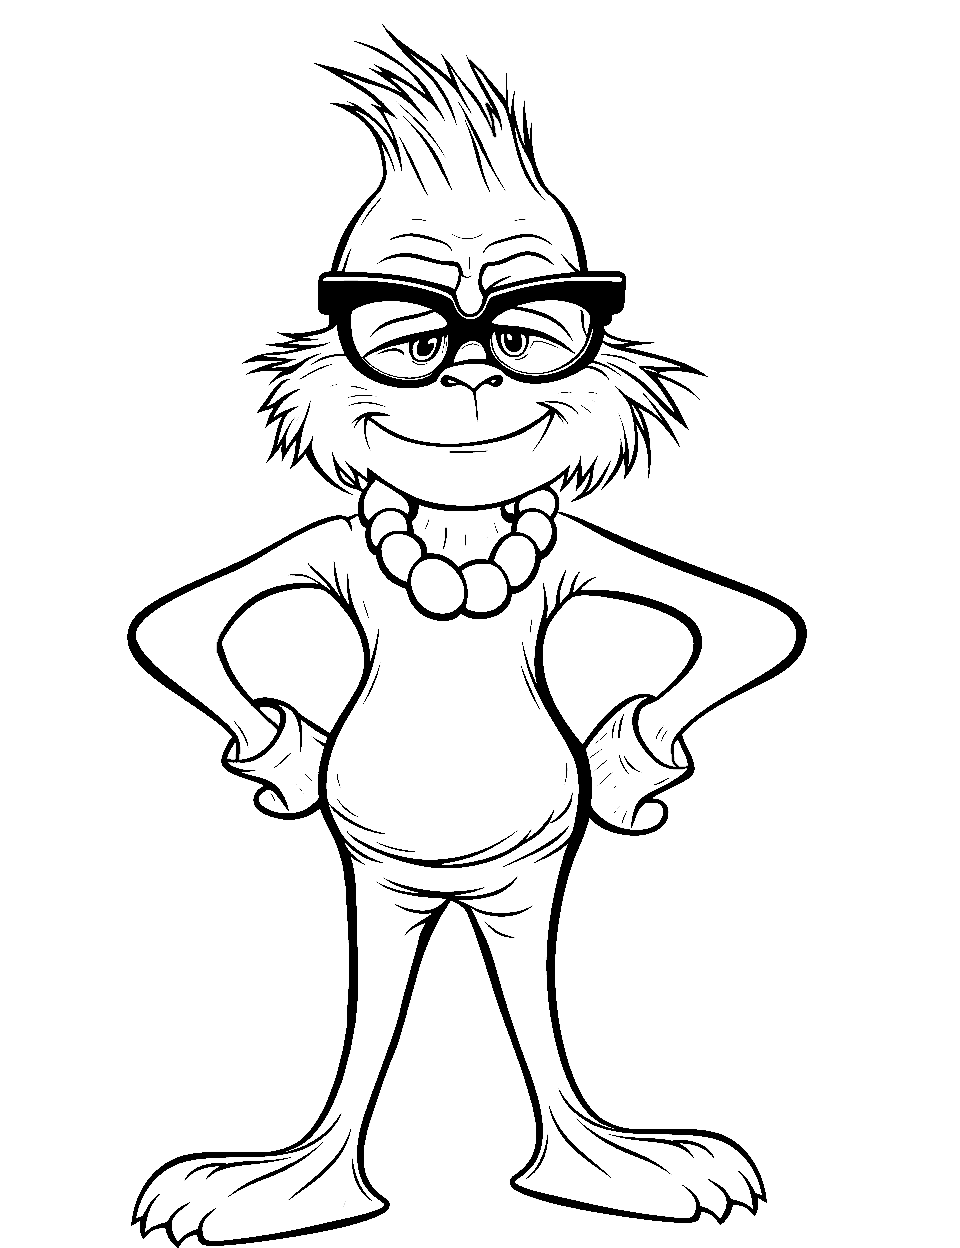 Cool Grinch Stance Coloring Page - The Grinch is striking a cool pose wearing glasses and a chain.